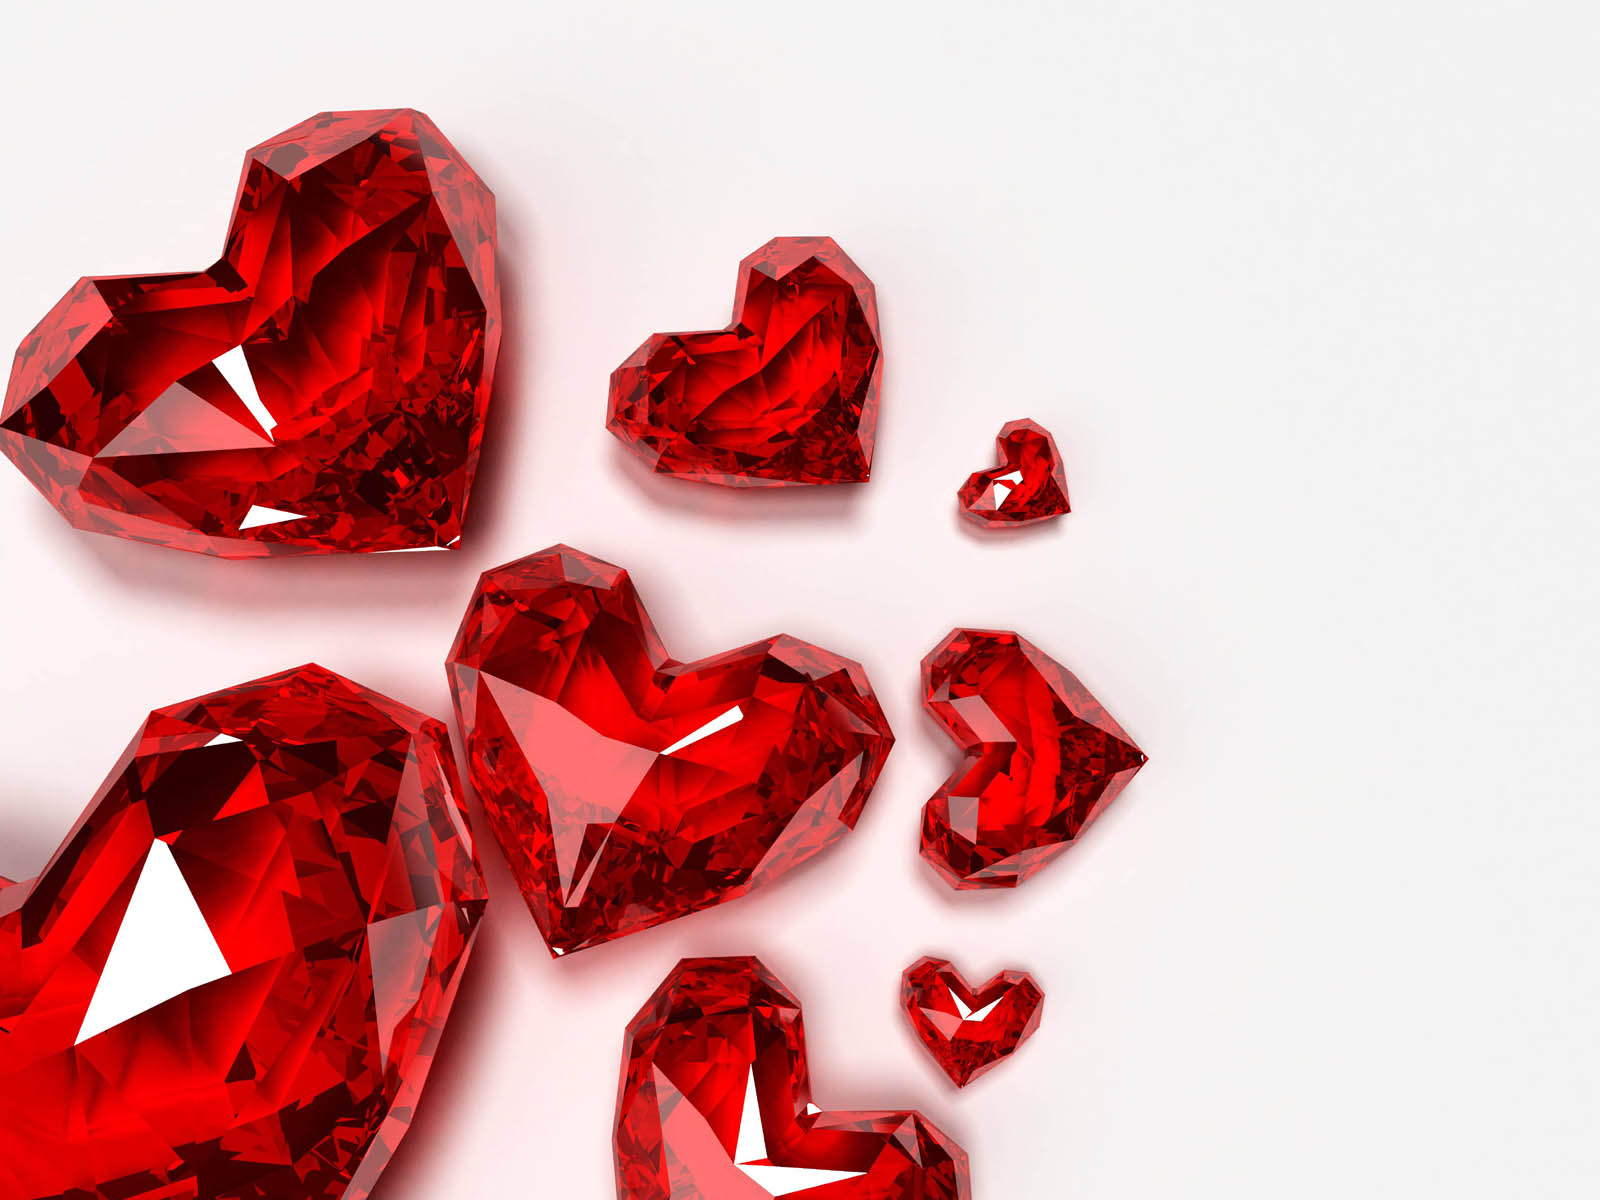 Tag Crystal Red Hearts Wallpapers Images Photos Pictures and